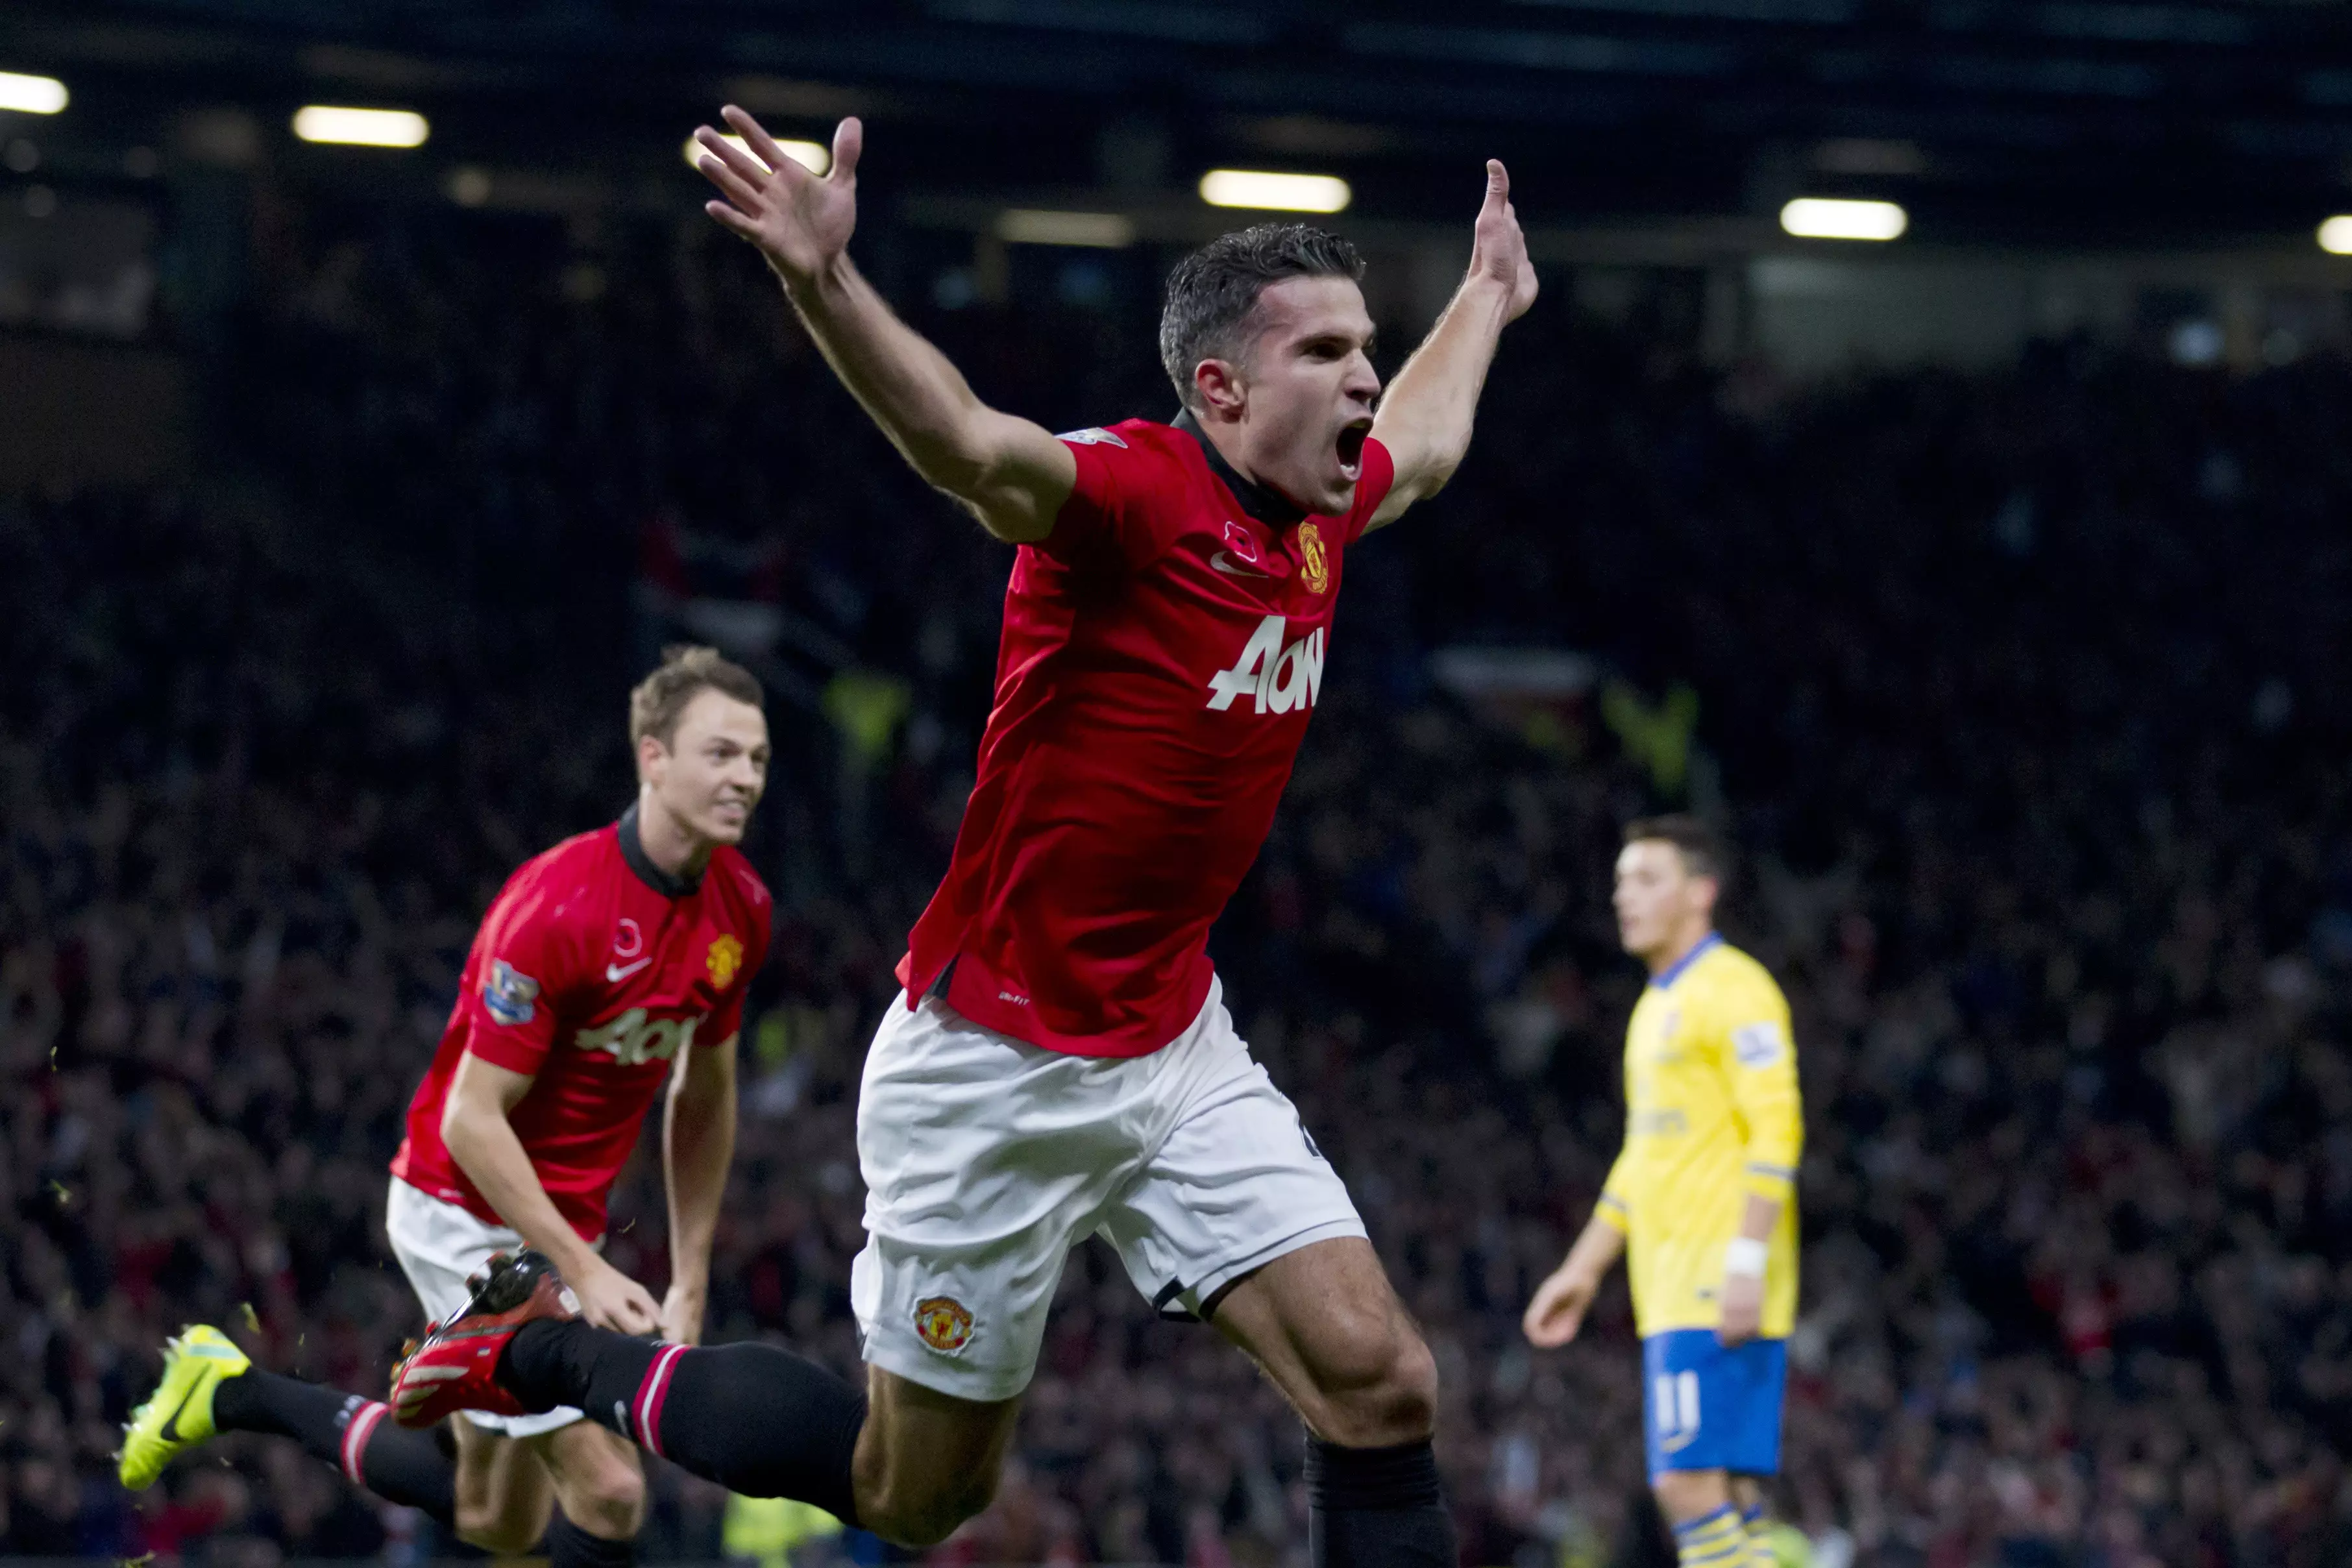 Van Persie scored 26 in the league in the title winning season. Image: PA Images